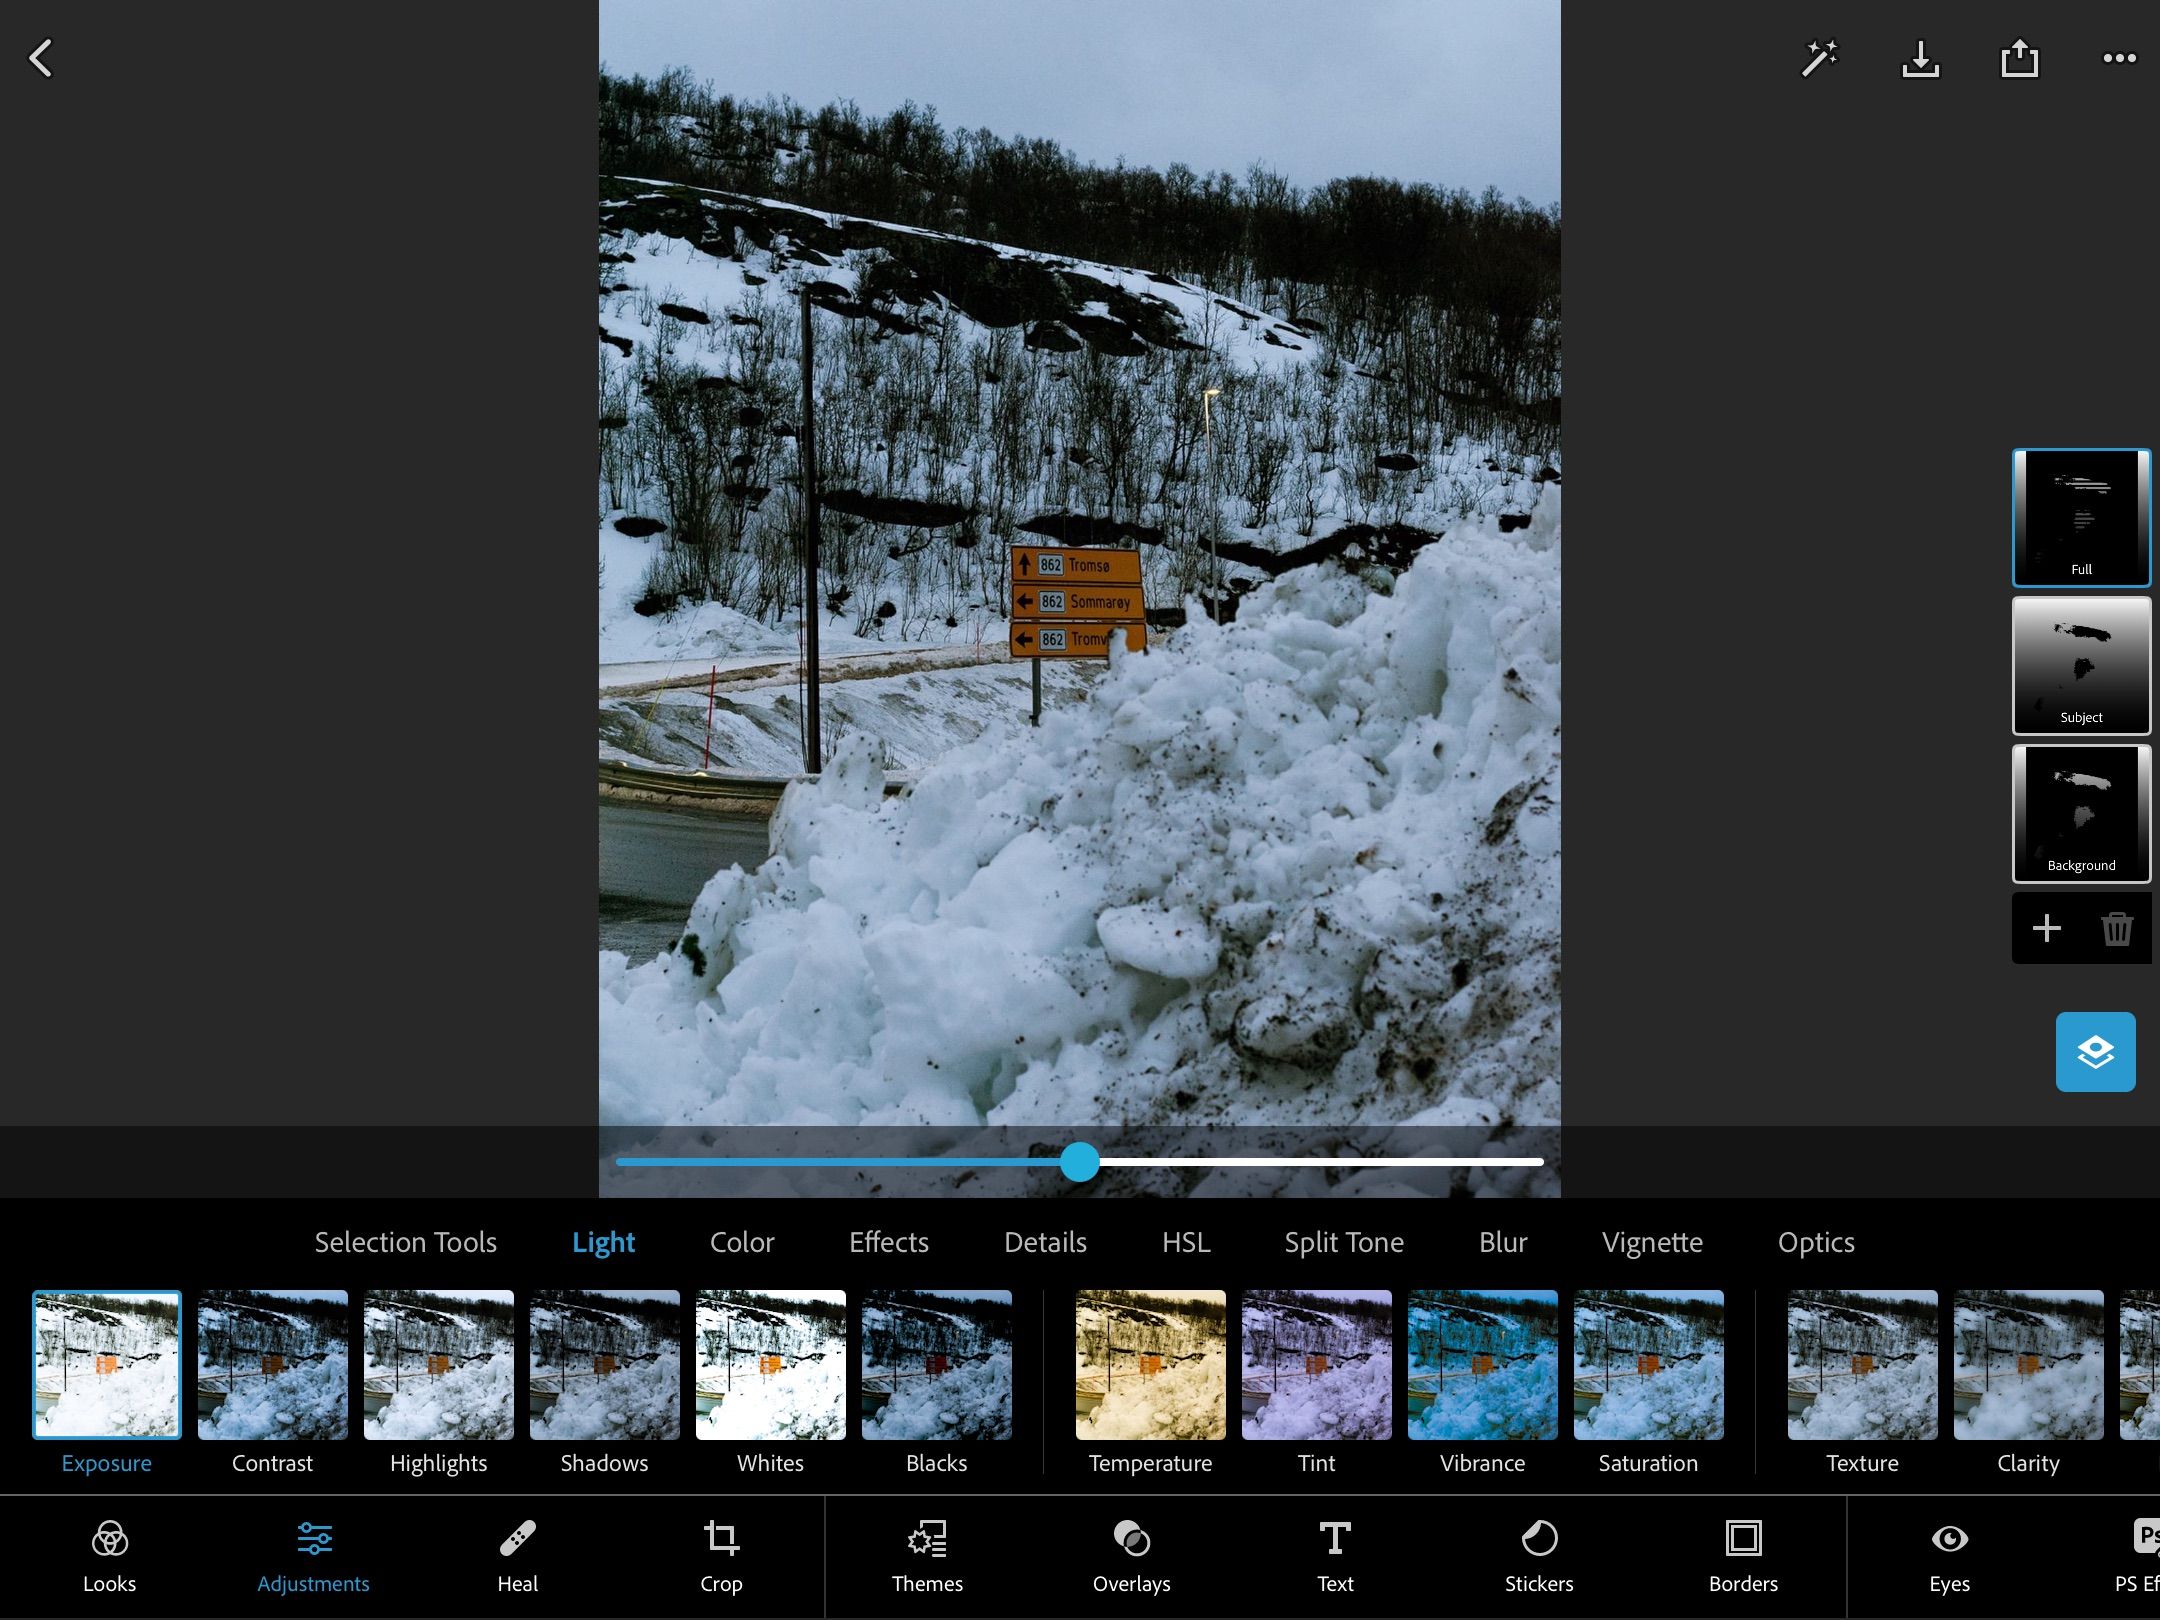 screenshot of image editing options in photoshop express